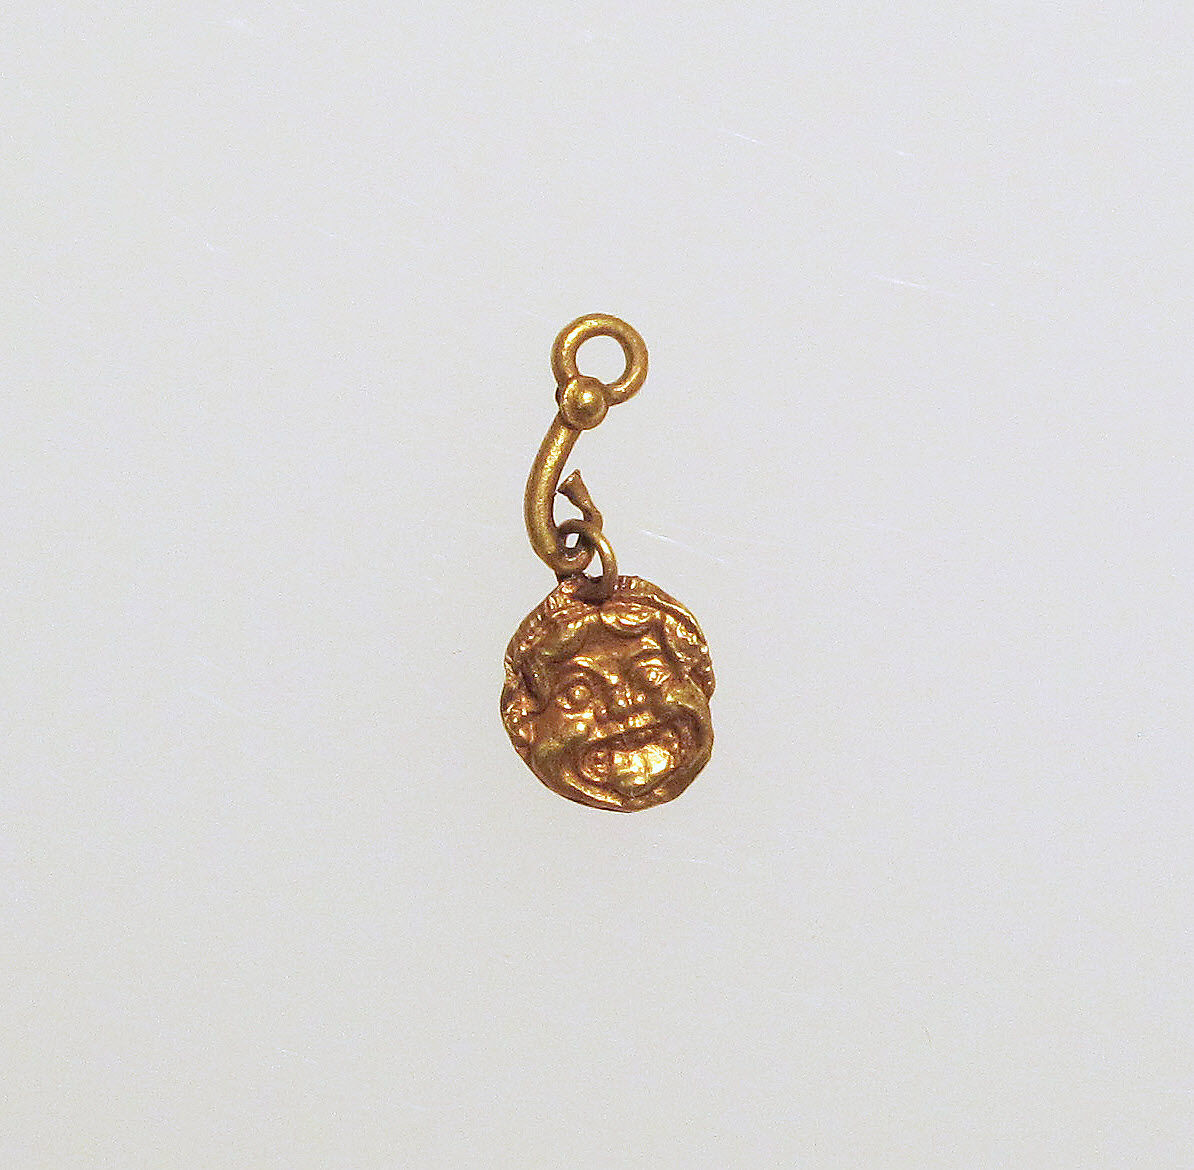 Pendant in the form of a Gorgoneion eye charm, Gold 